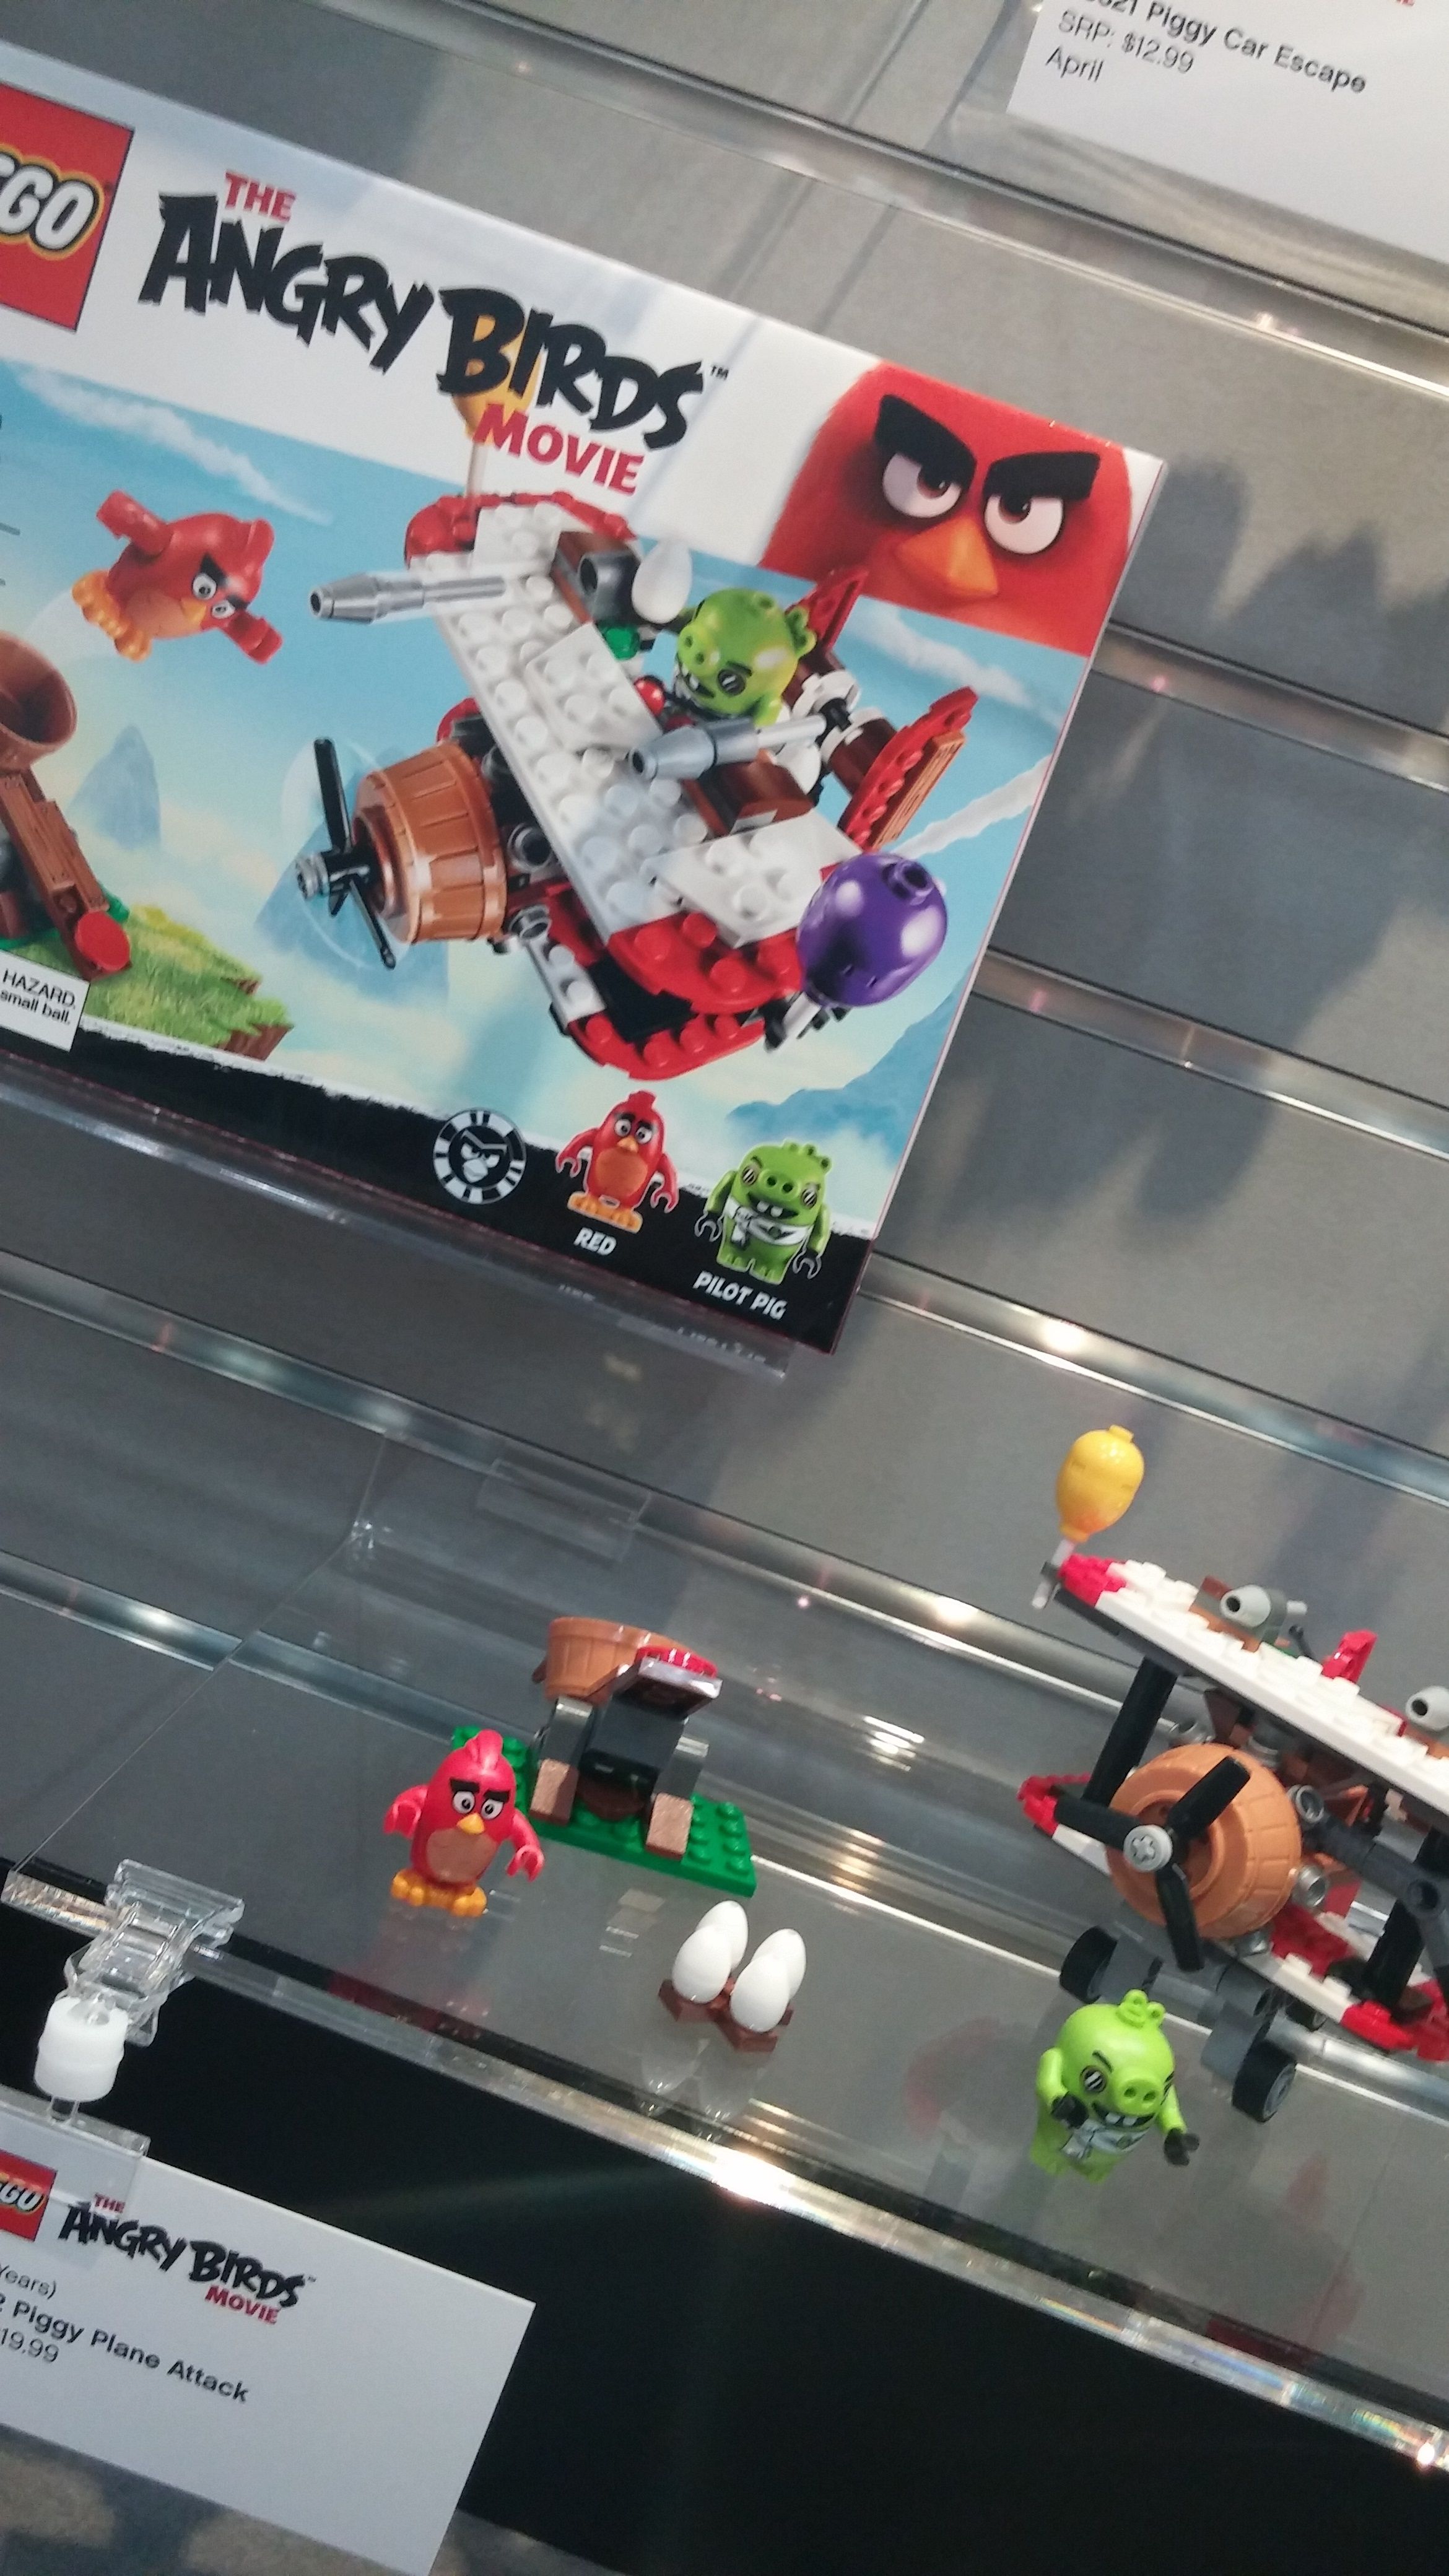 A look at the box art and display set for one of the new Angry Birds LEGO toys.